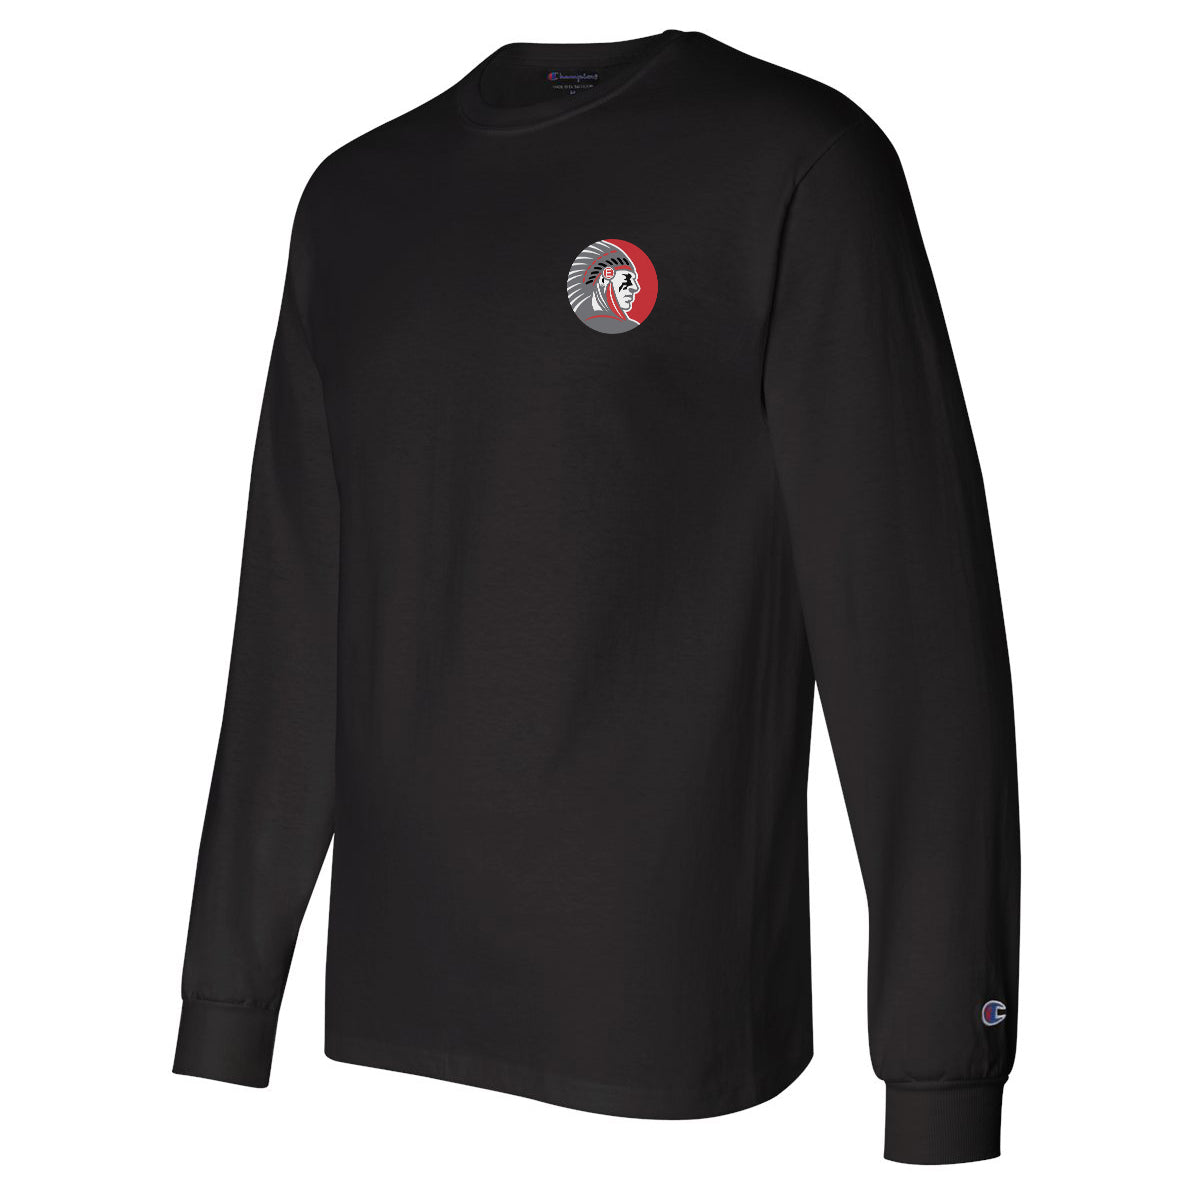 East Middle School Champion Long Sleeve T-Shirt